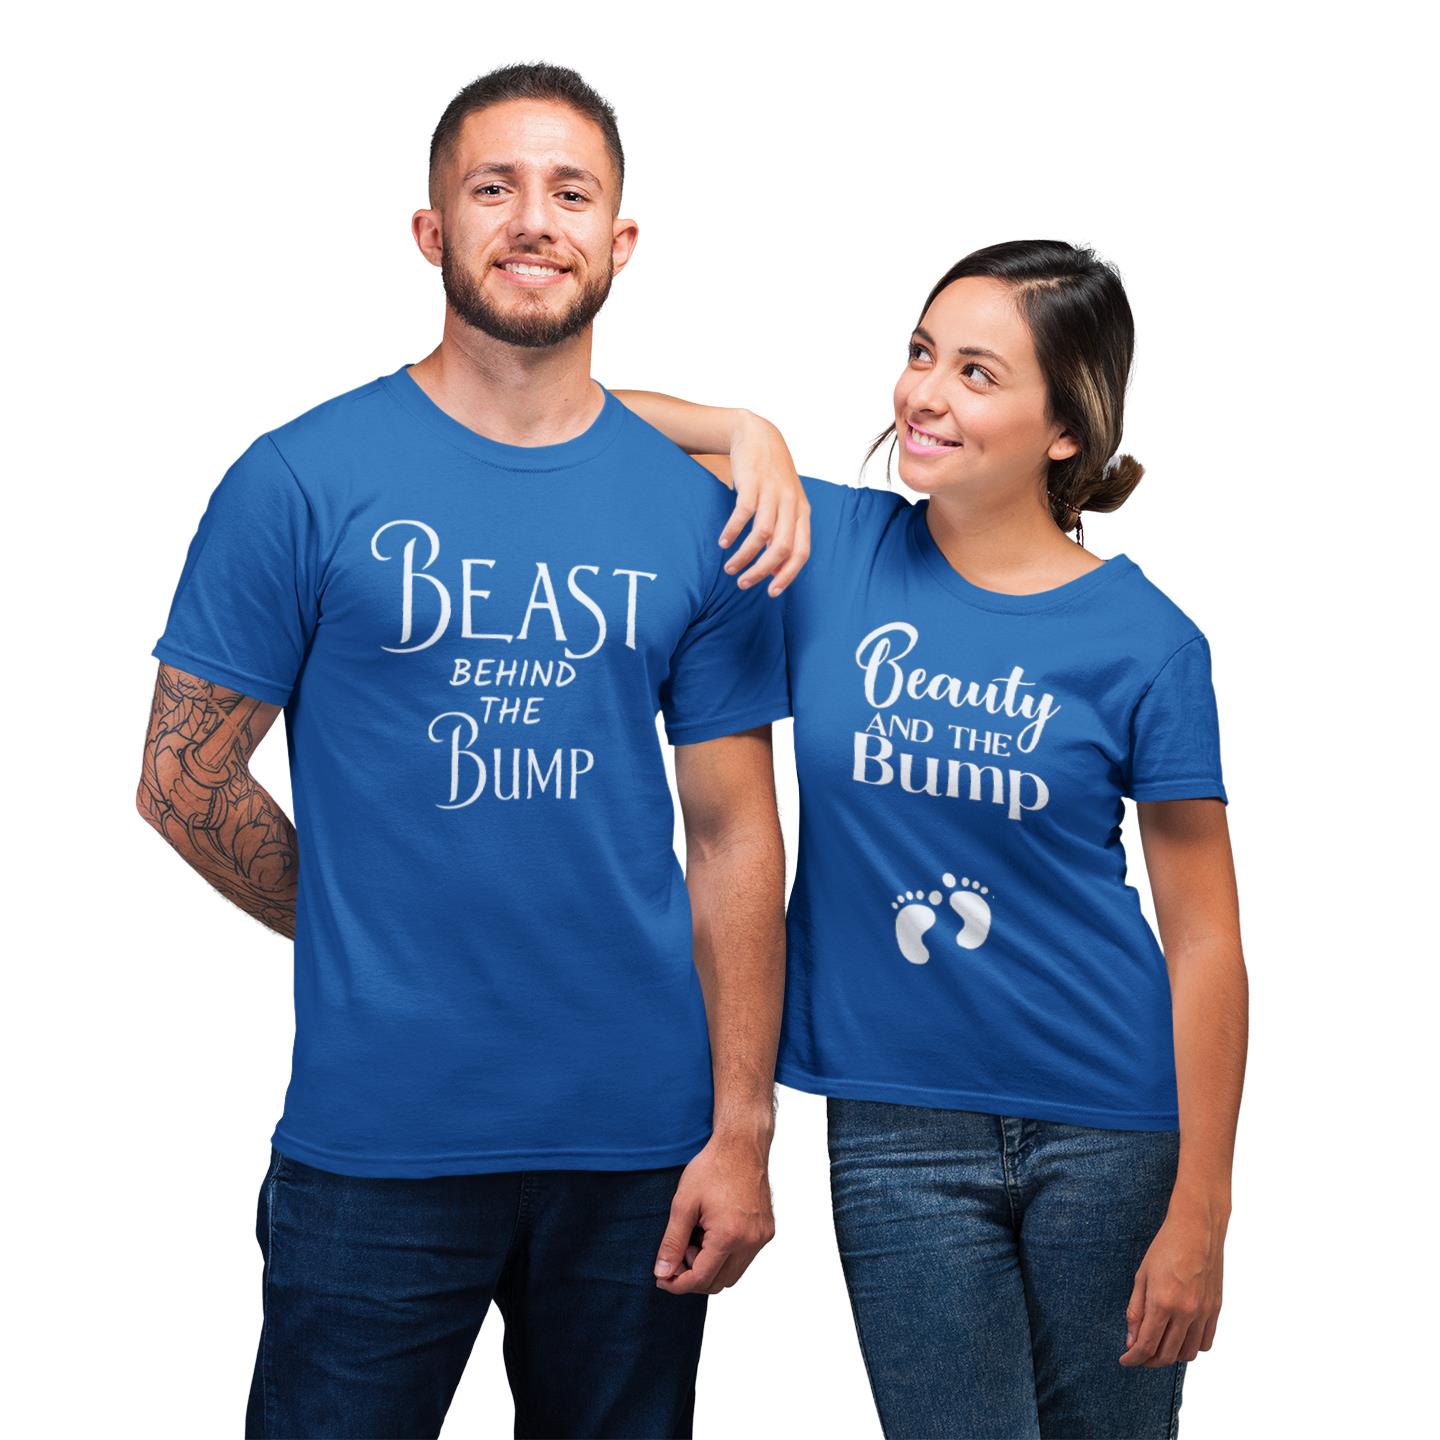 Matching Beauty And The Bump Beast Behind The Bump Shirts For Couple Wife And Husband Pregnancy Announcement Gift T-shirt